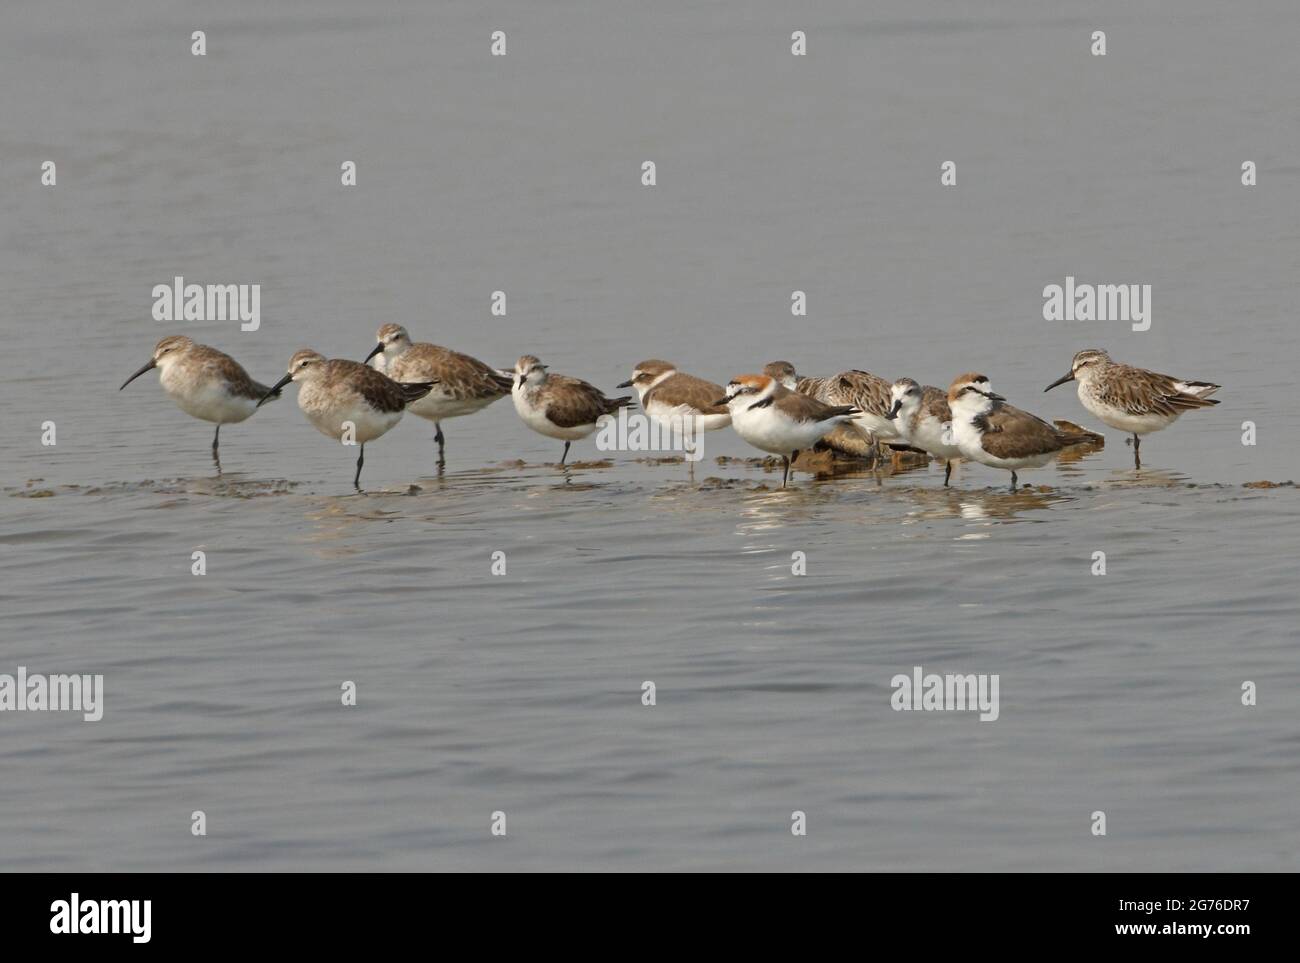 Spoon-billed Sandpiper (Calidris pygmeus) adult with mixed group of waders, Curlew Sandpiper (C.ferruginea), Red-necked Stint (C.ruficollis) Kentish P Stock Photo